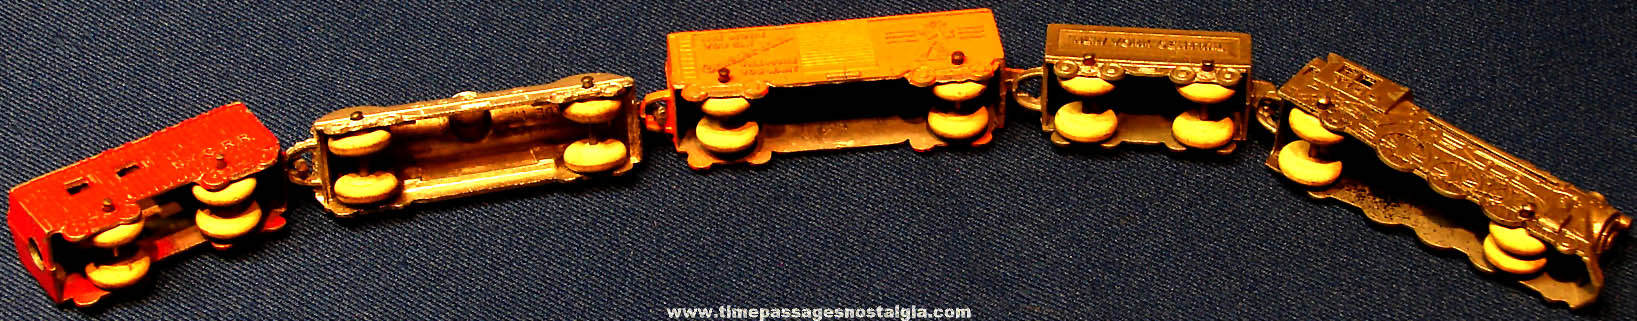 Old Cracker Jack Painted Metal Tootsietoy Company New York Central Railroad Miniature Toy Train Set